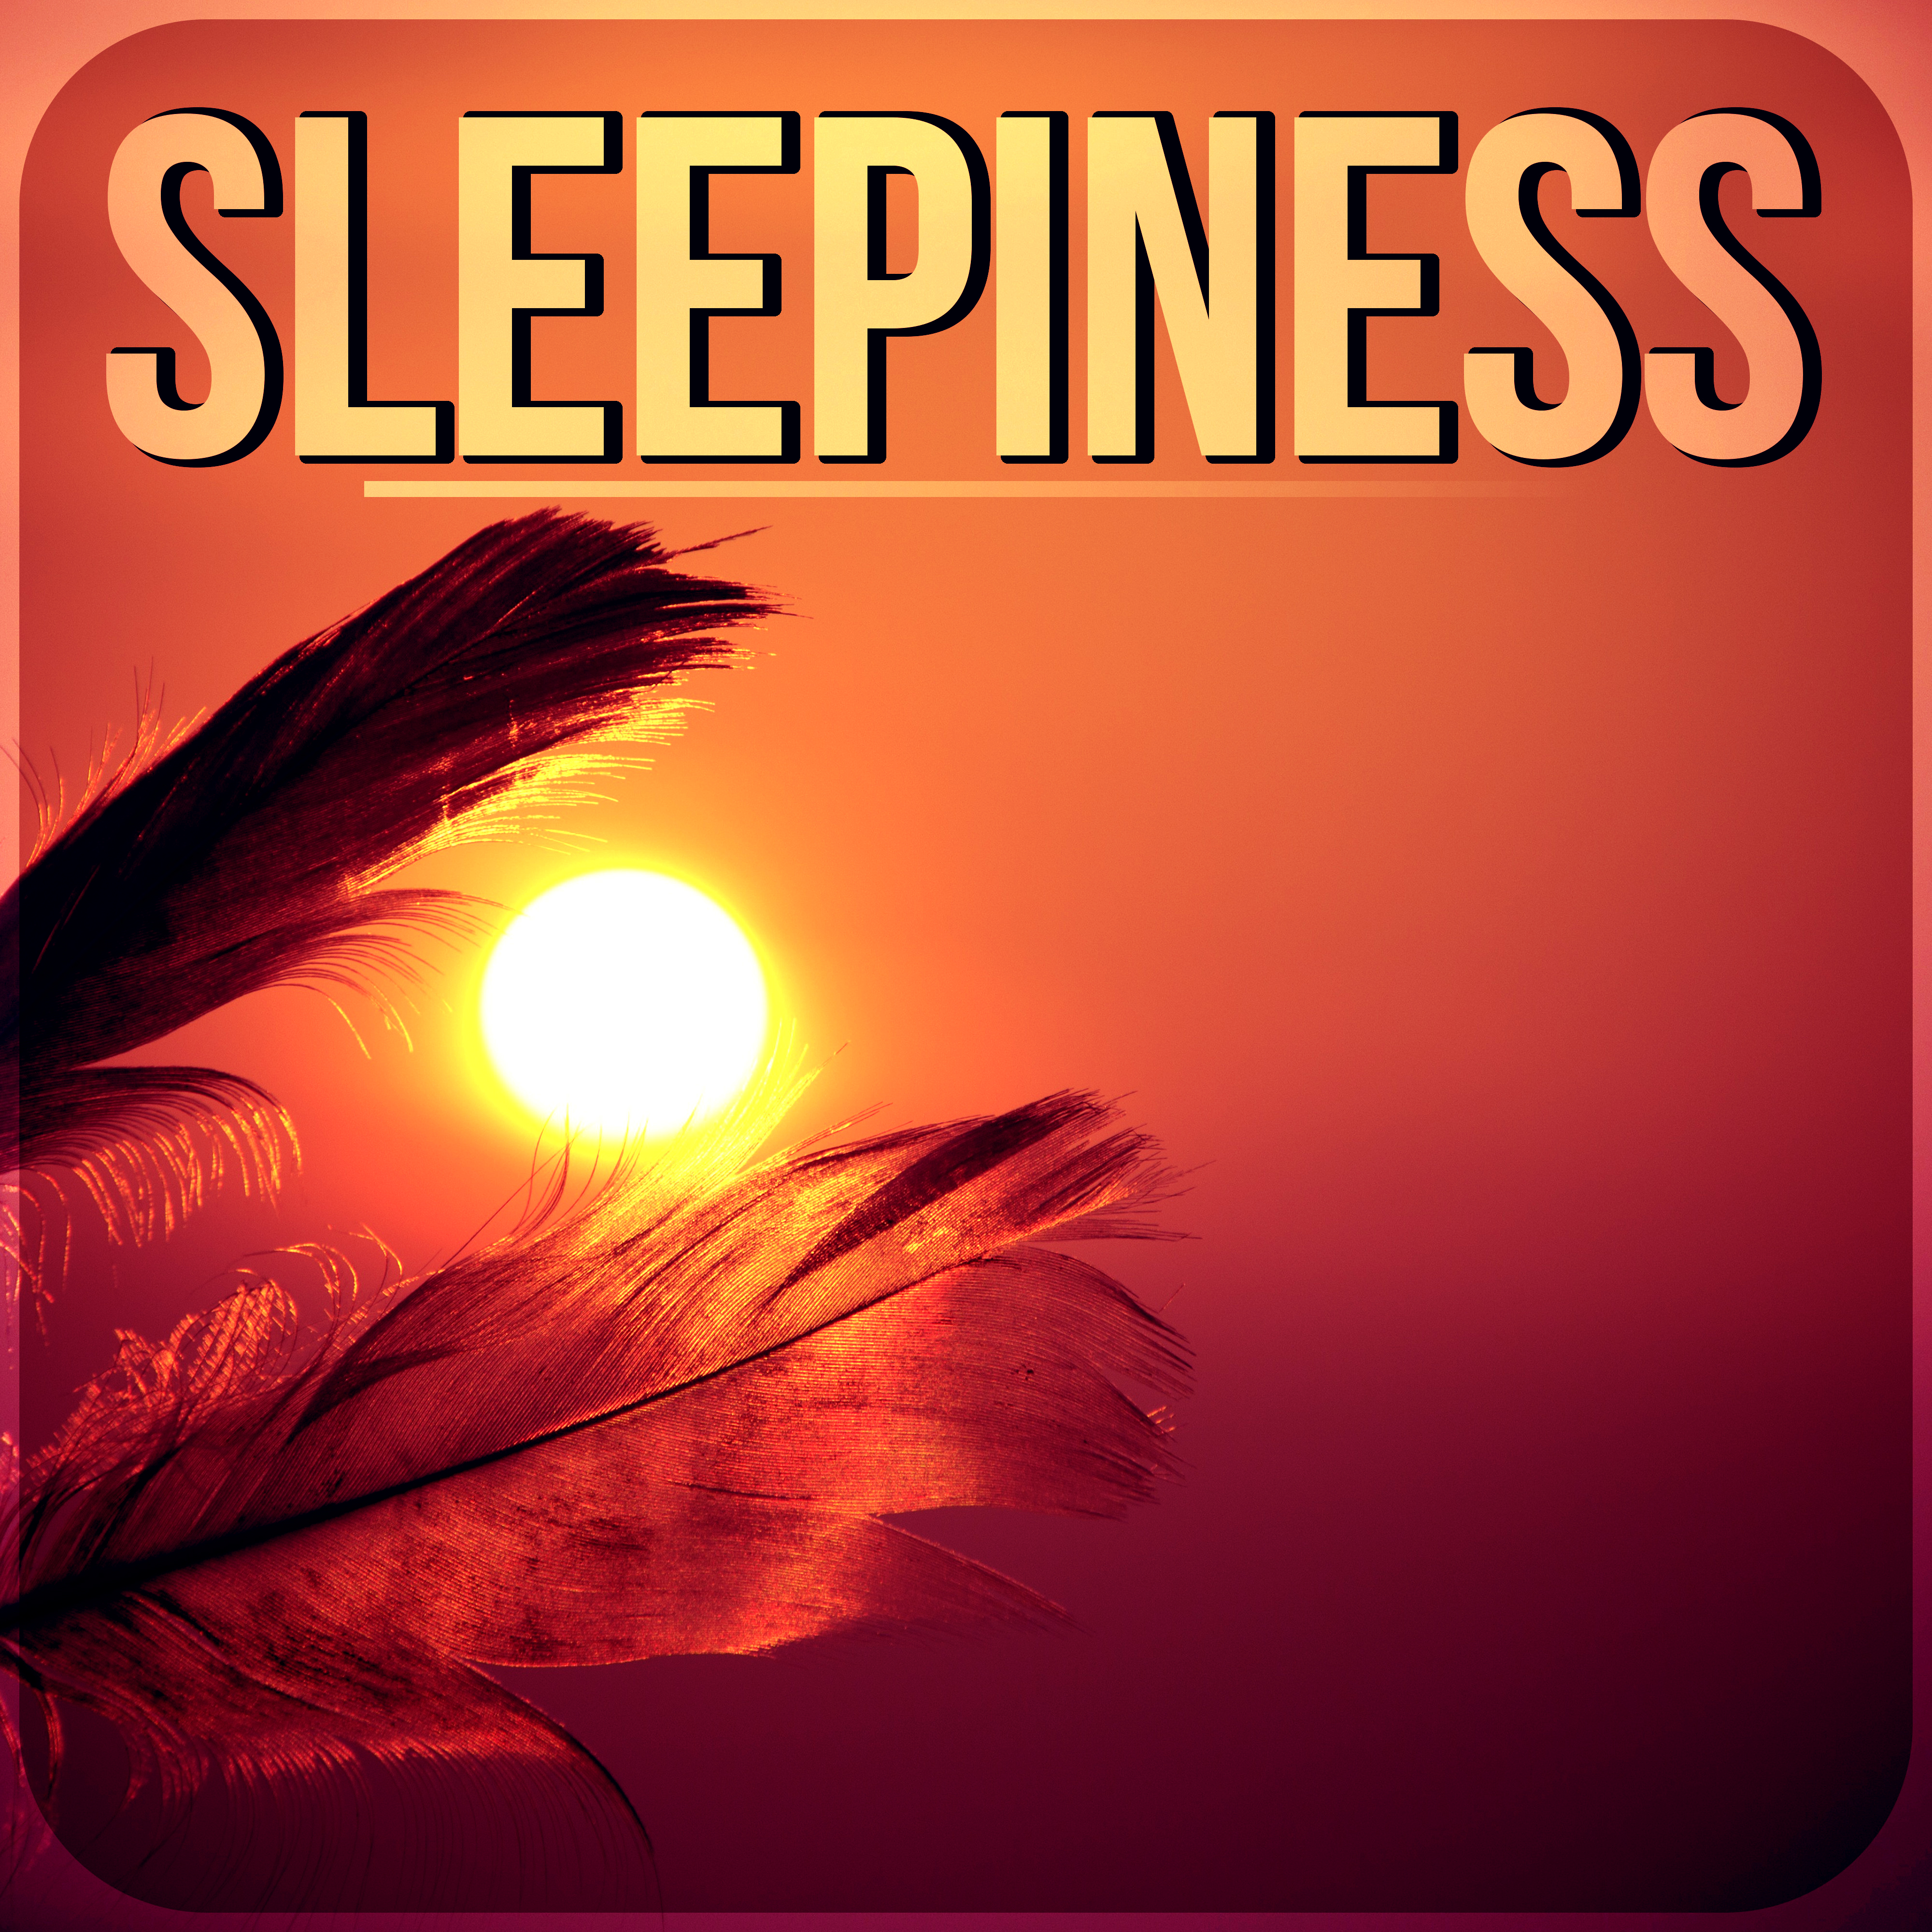 Sleepiness - Nature for Deep Sleep, Relaxing Sounds and Long Sleeping Songs to Help You Relax at Night